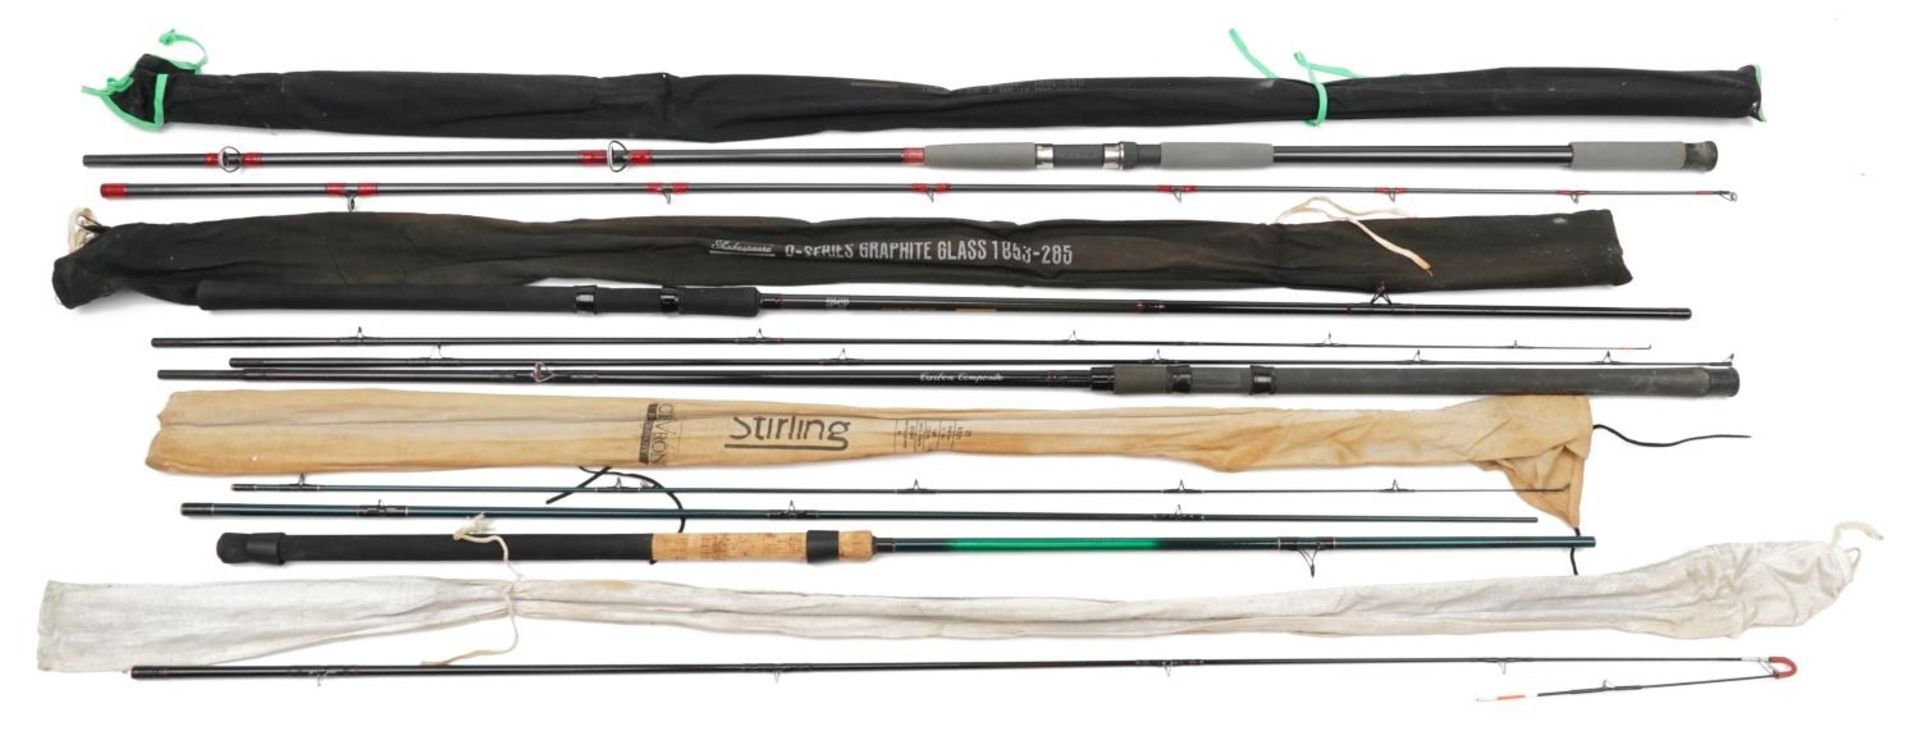 Four carbon fishing rods comprising Silstar MX3820-285, Chevron Sterling, Shakespeare 0-Series